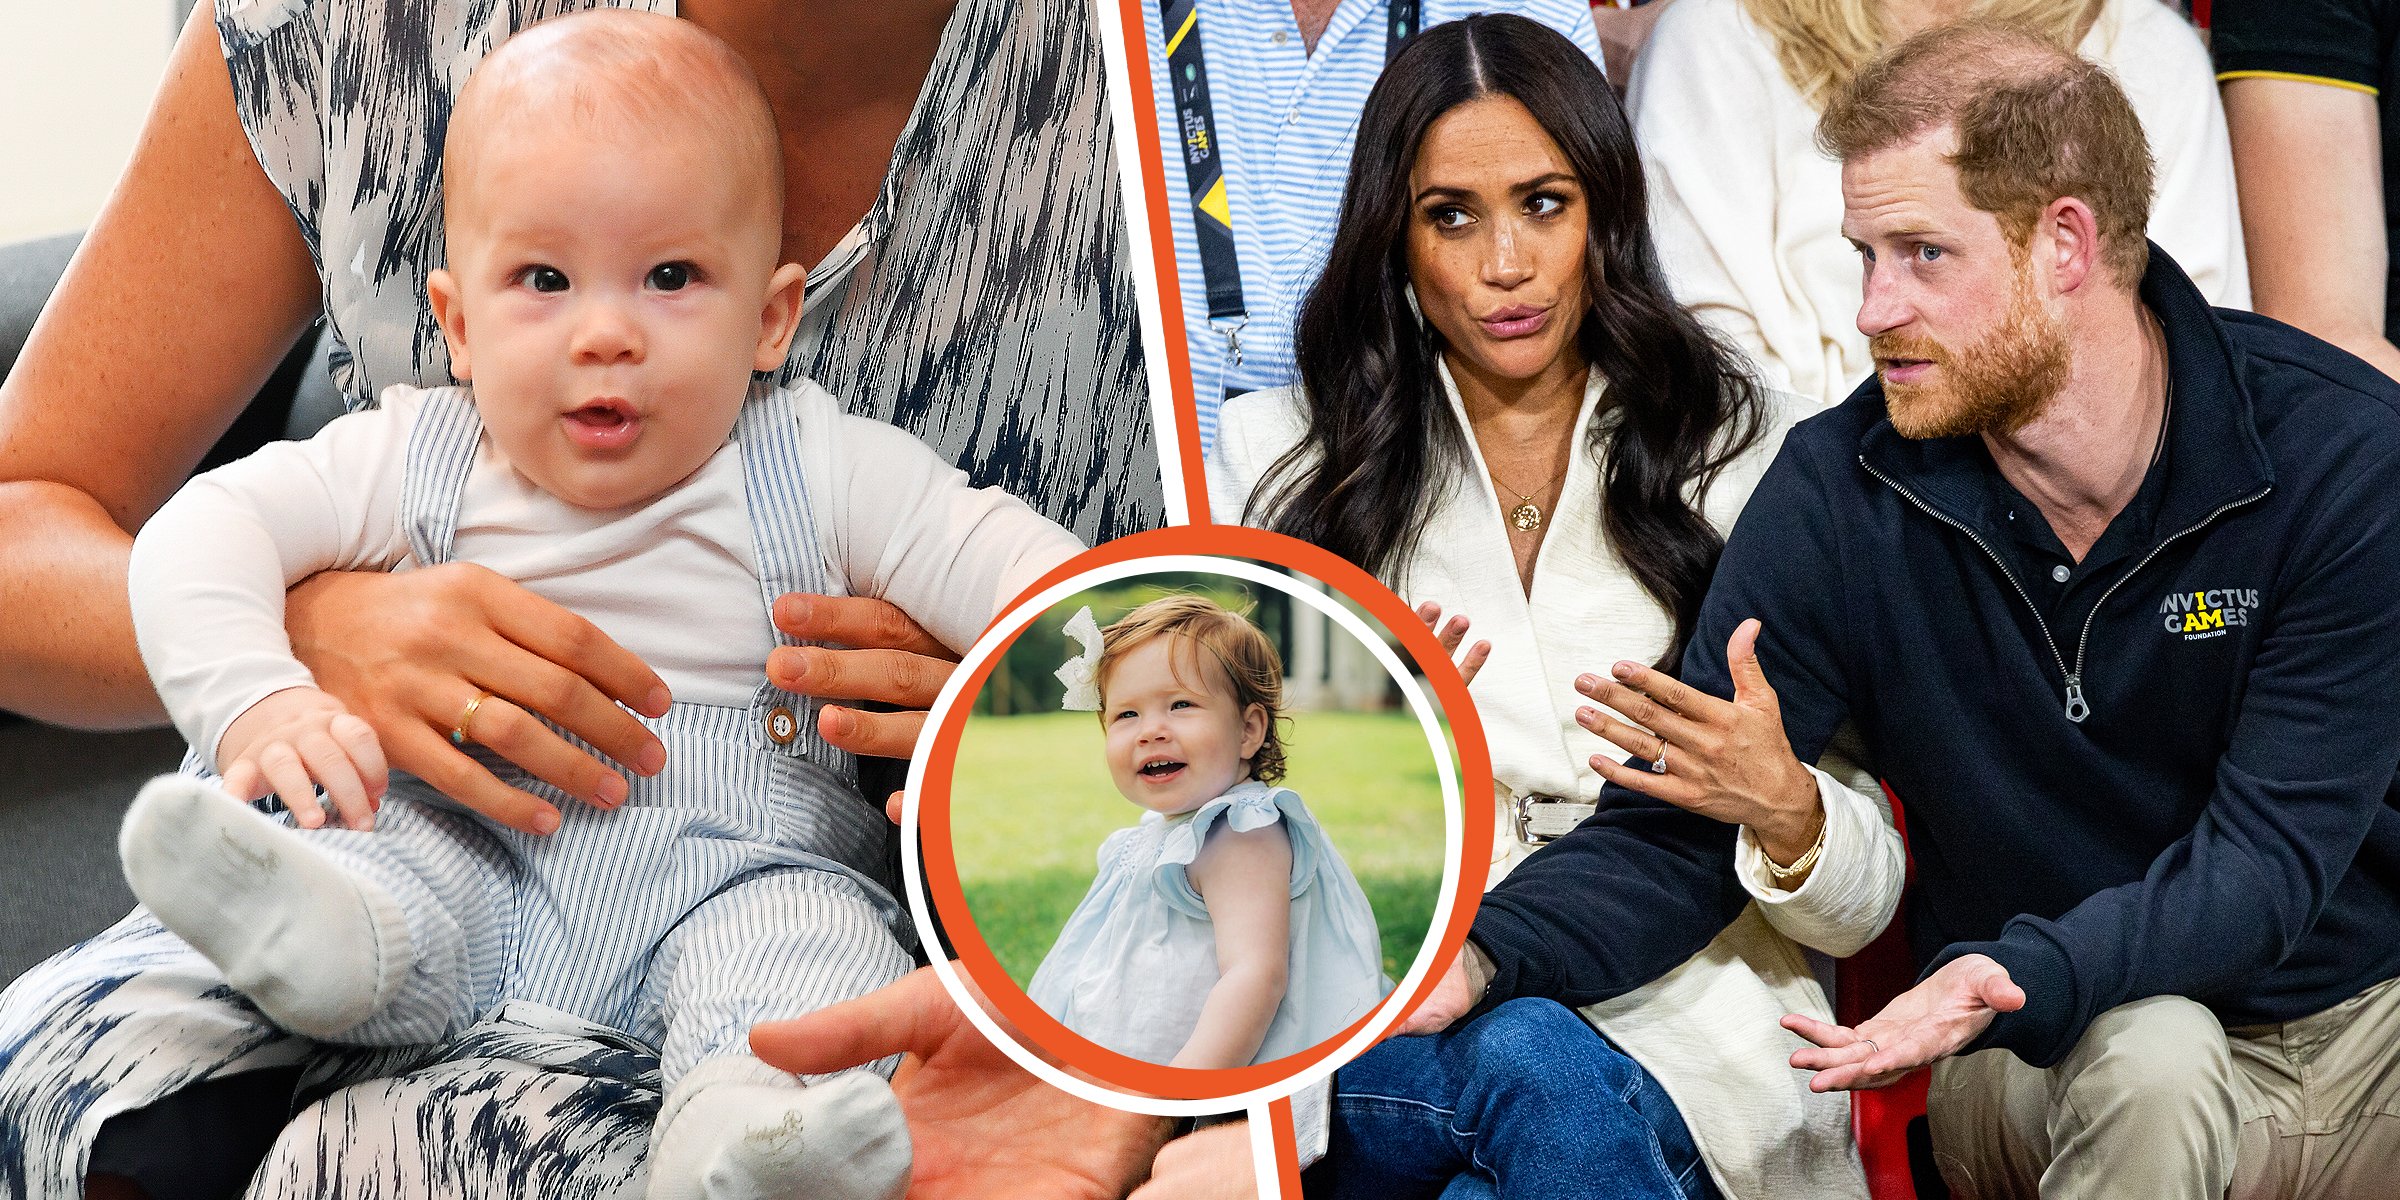 Meghan Markle and Archie | Lilibet | Meghan Markle and Prince Harry | Source: Twitter.com/misanharriman | Getty Images